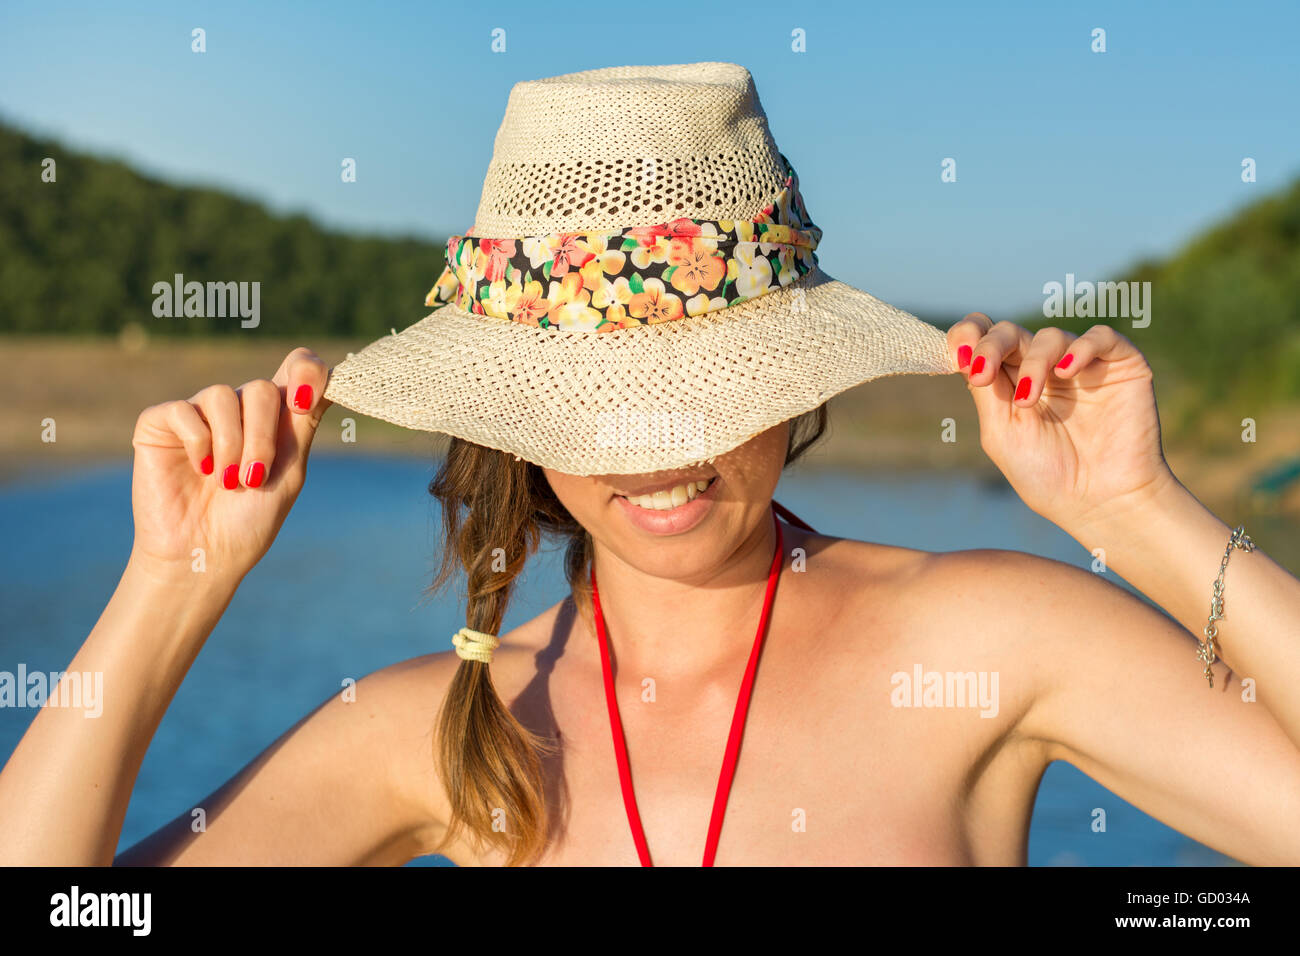 Portrait of beautiful women by the lake on summer vacation Stock Photo